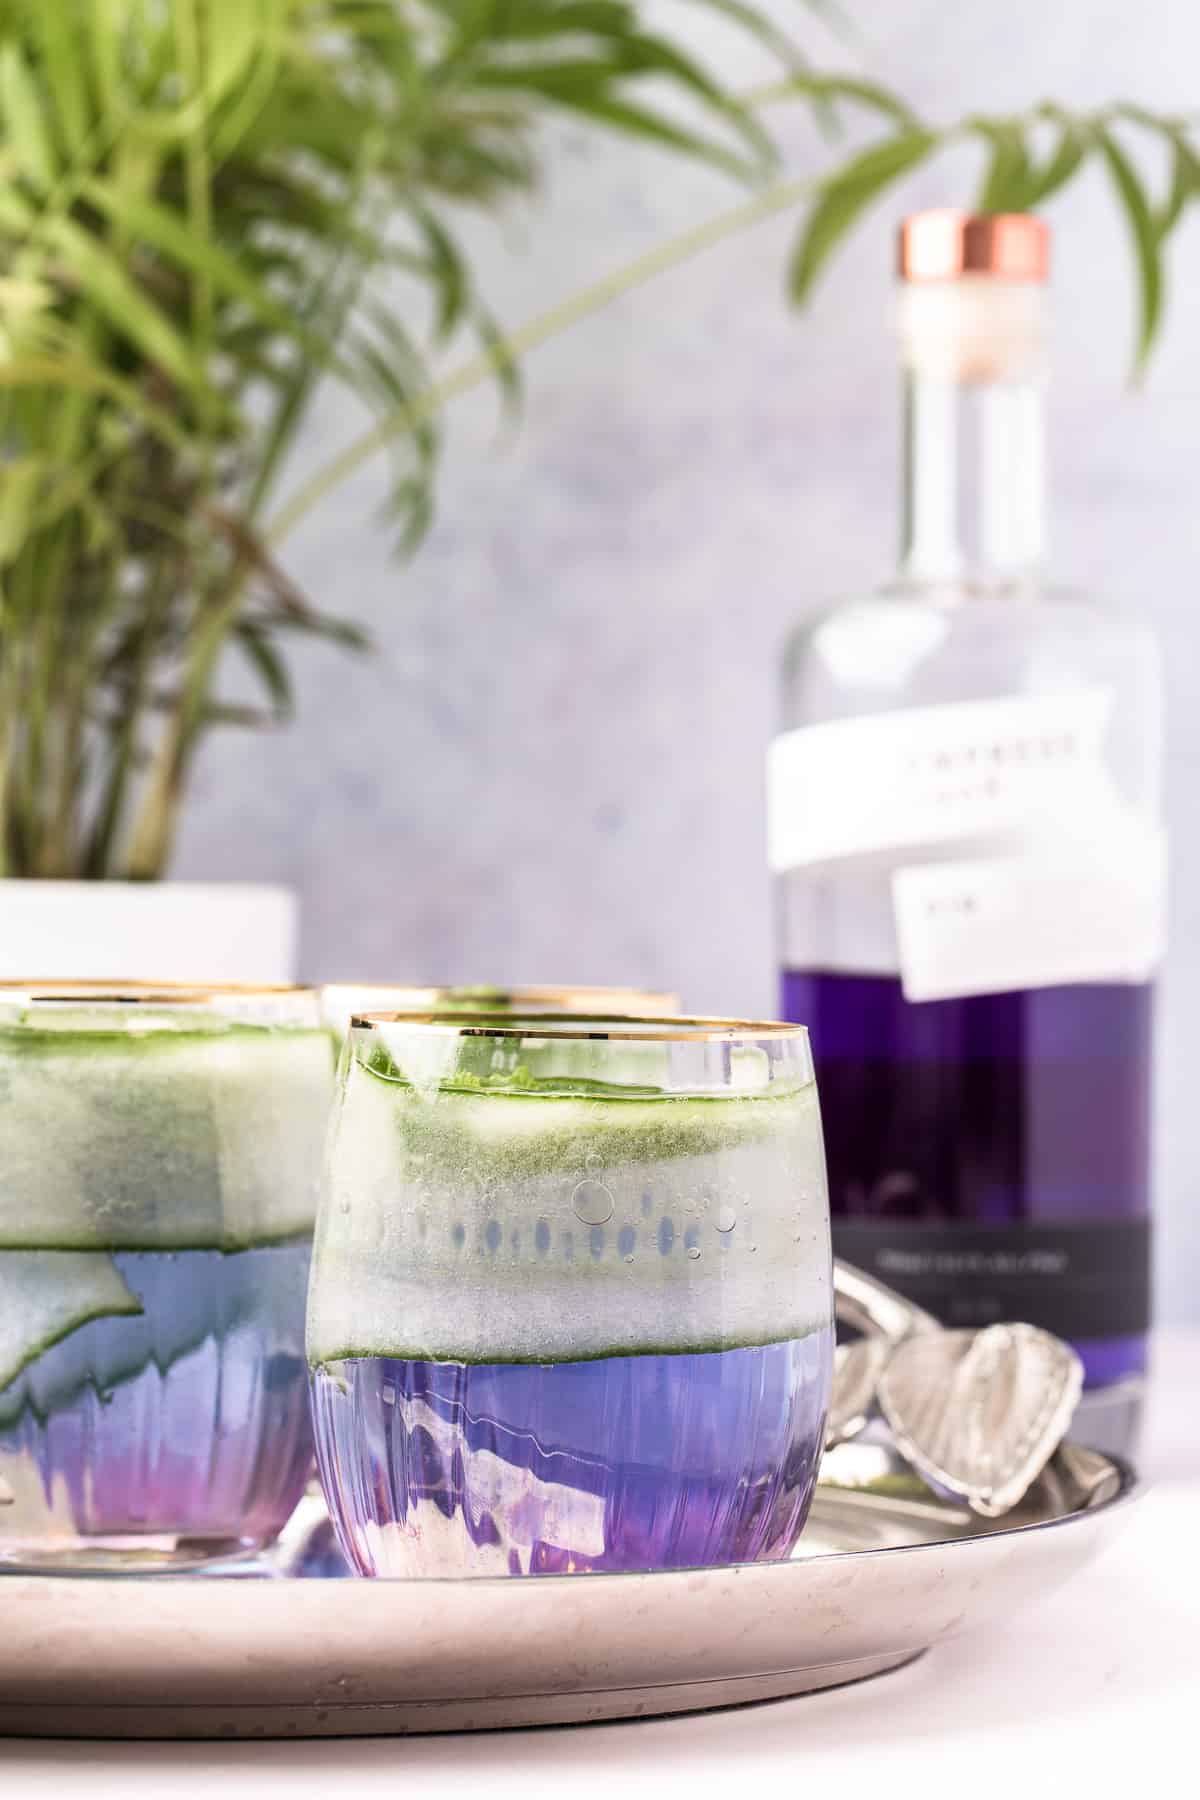 Multiple gin cocktails are presented on a serving platter next to a bottle of Empress Gin.